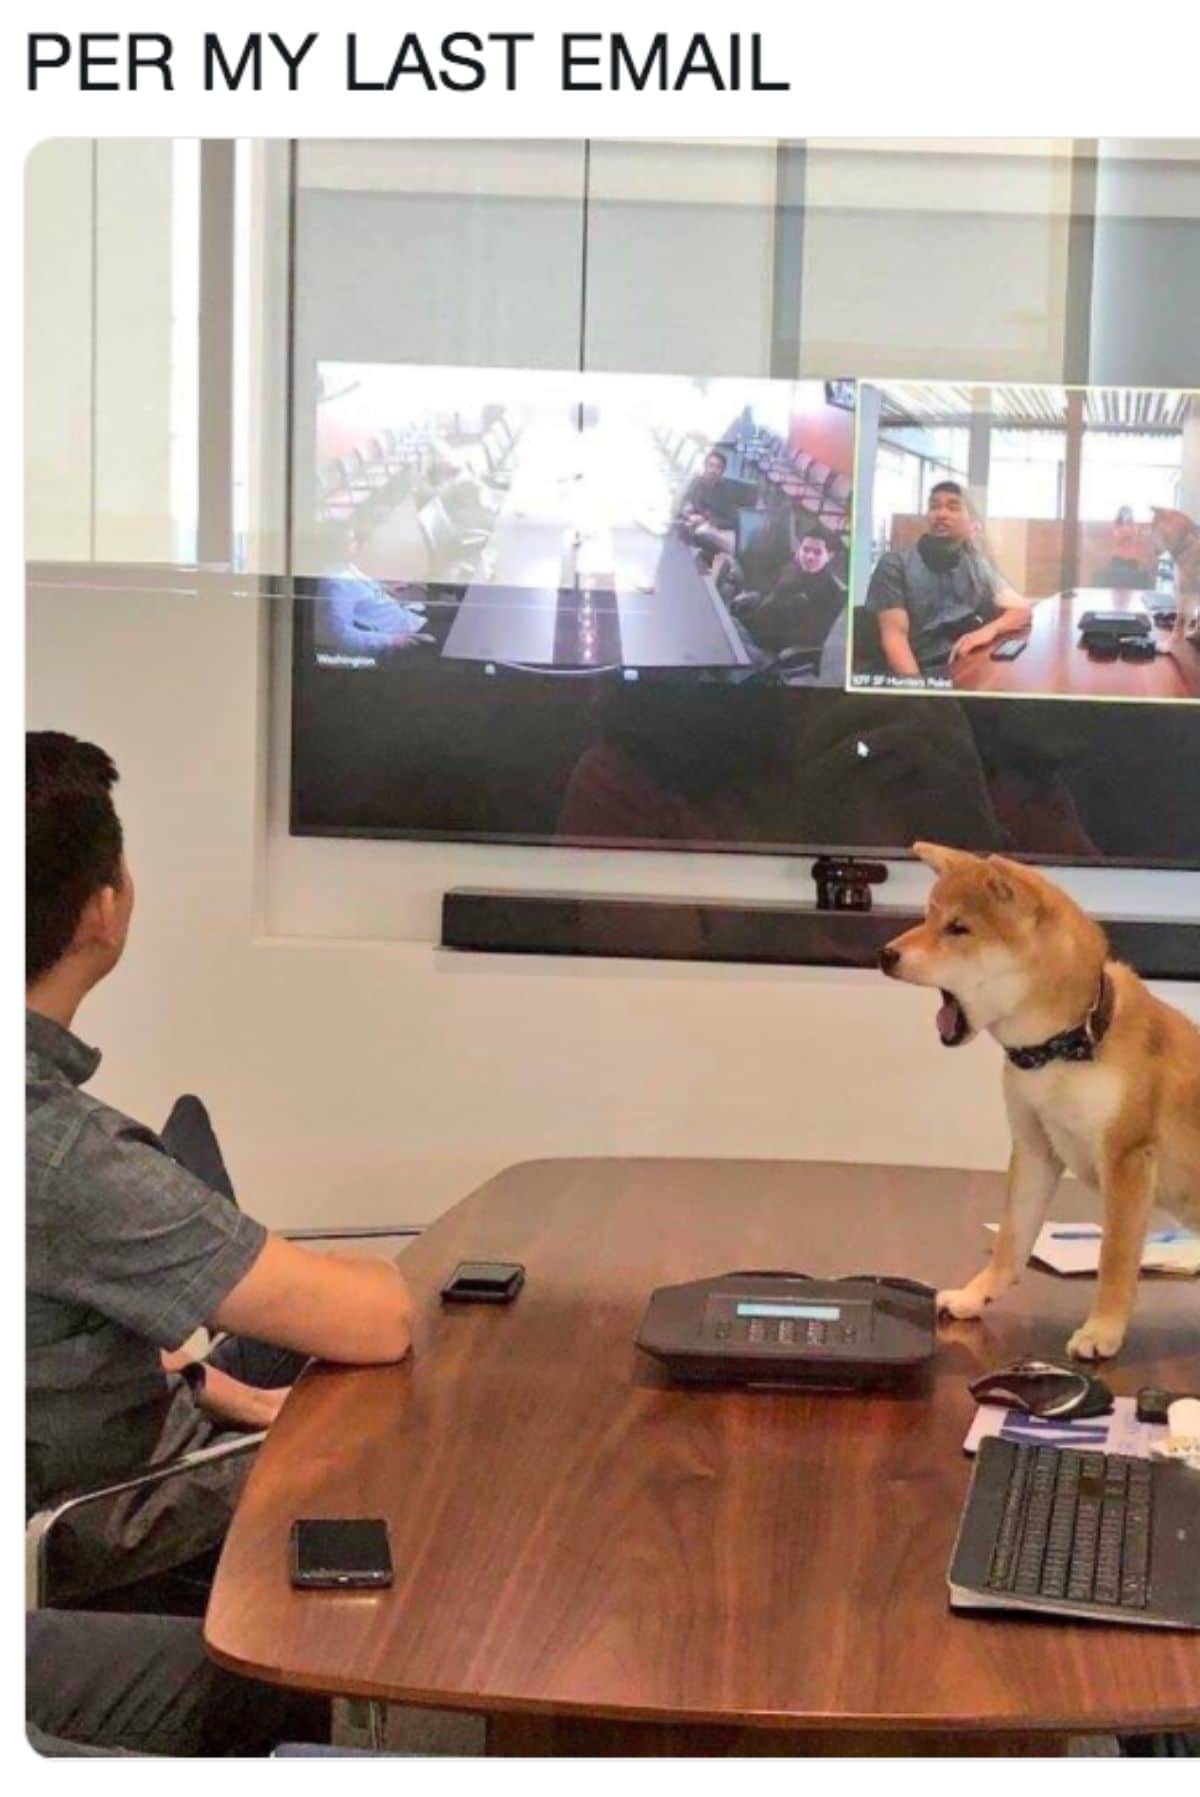 brown shiba inu on a brown table screaming at a man seated in a chair in front of a large television screen